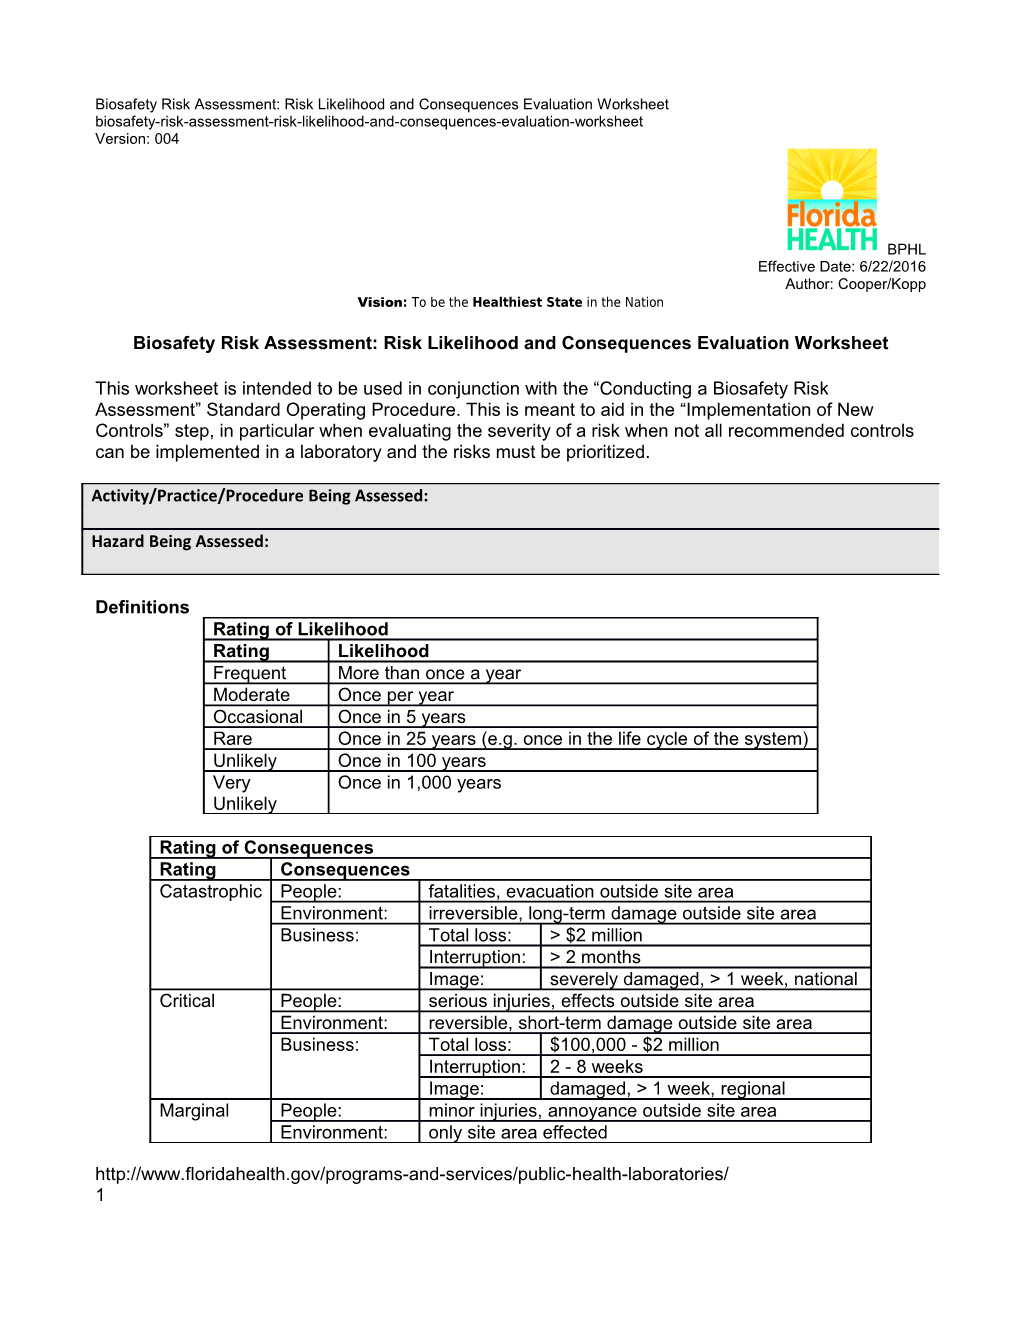 Biosafety Risk Assessment: Risk Likelihood and Consequences Evaluation Worksheet